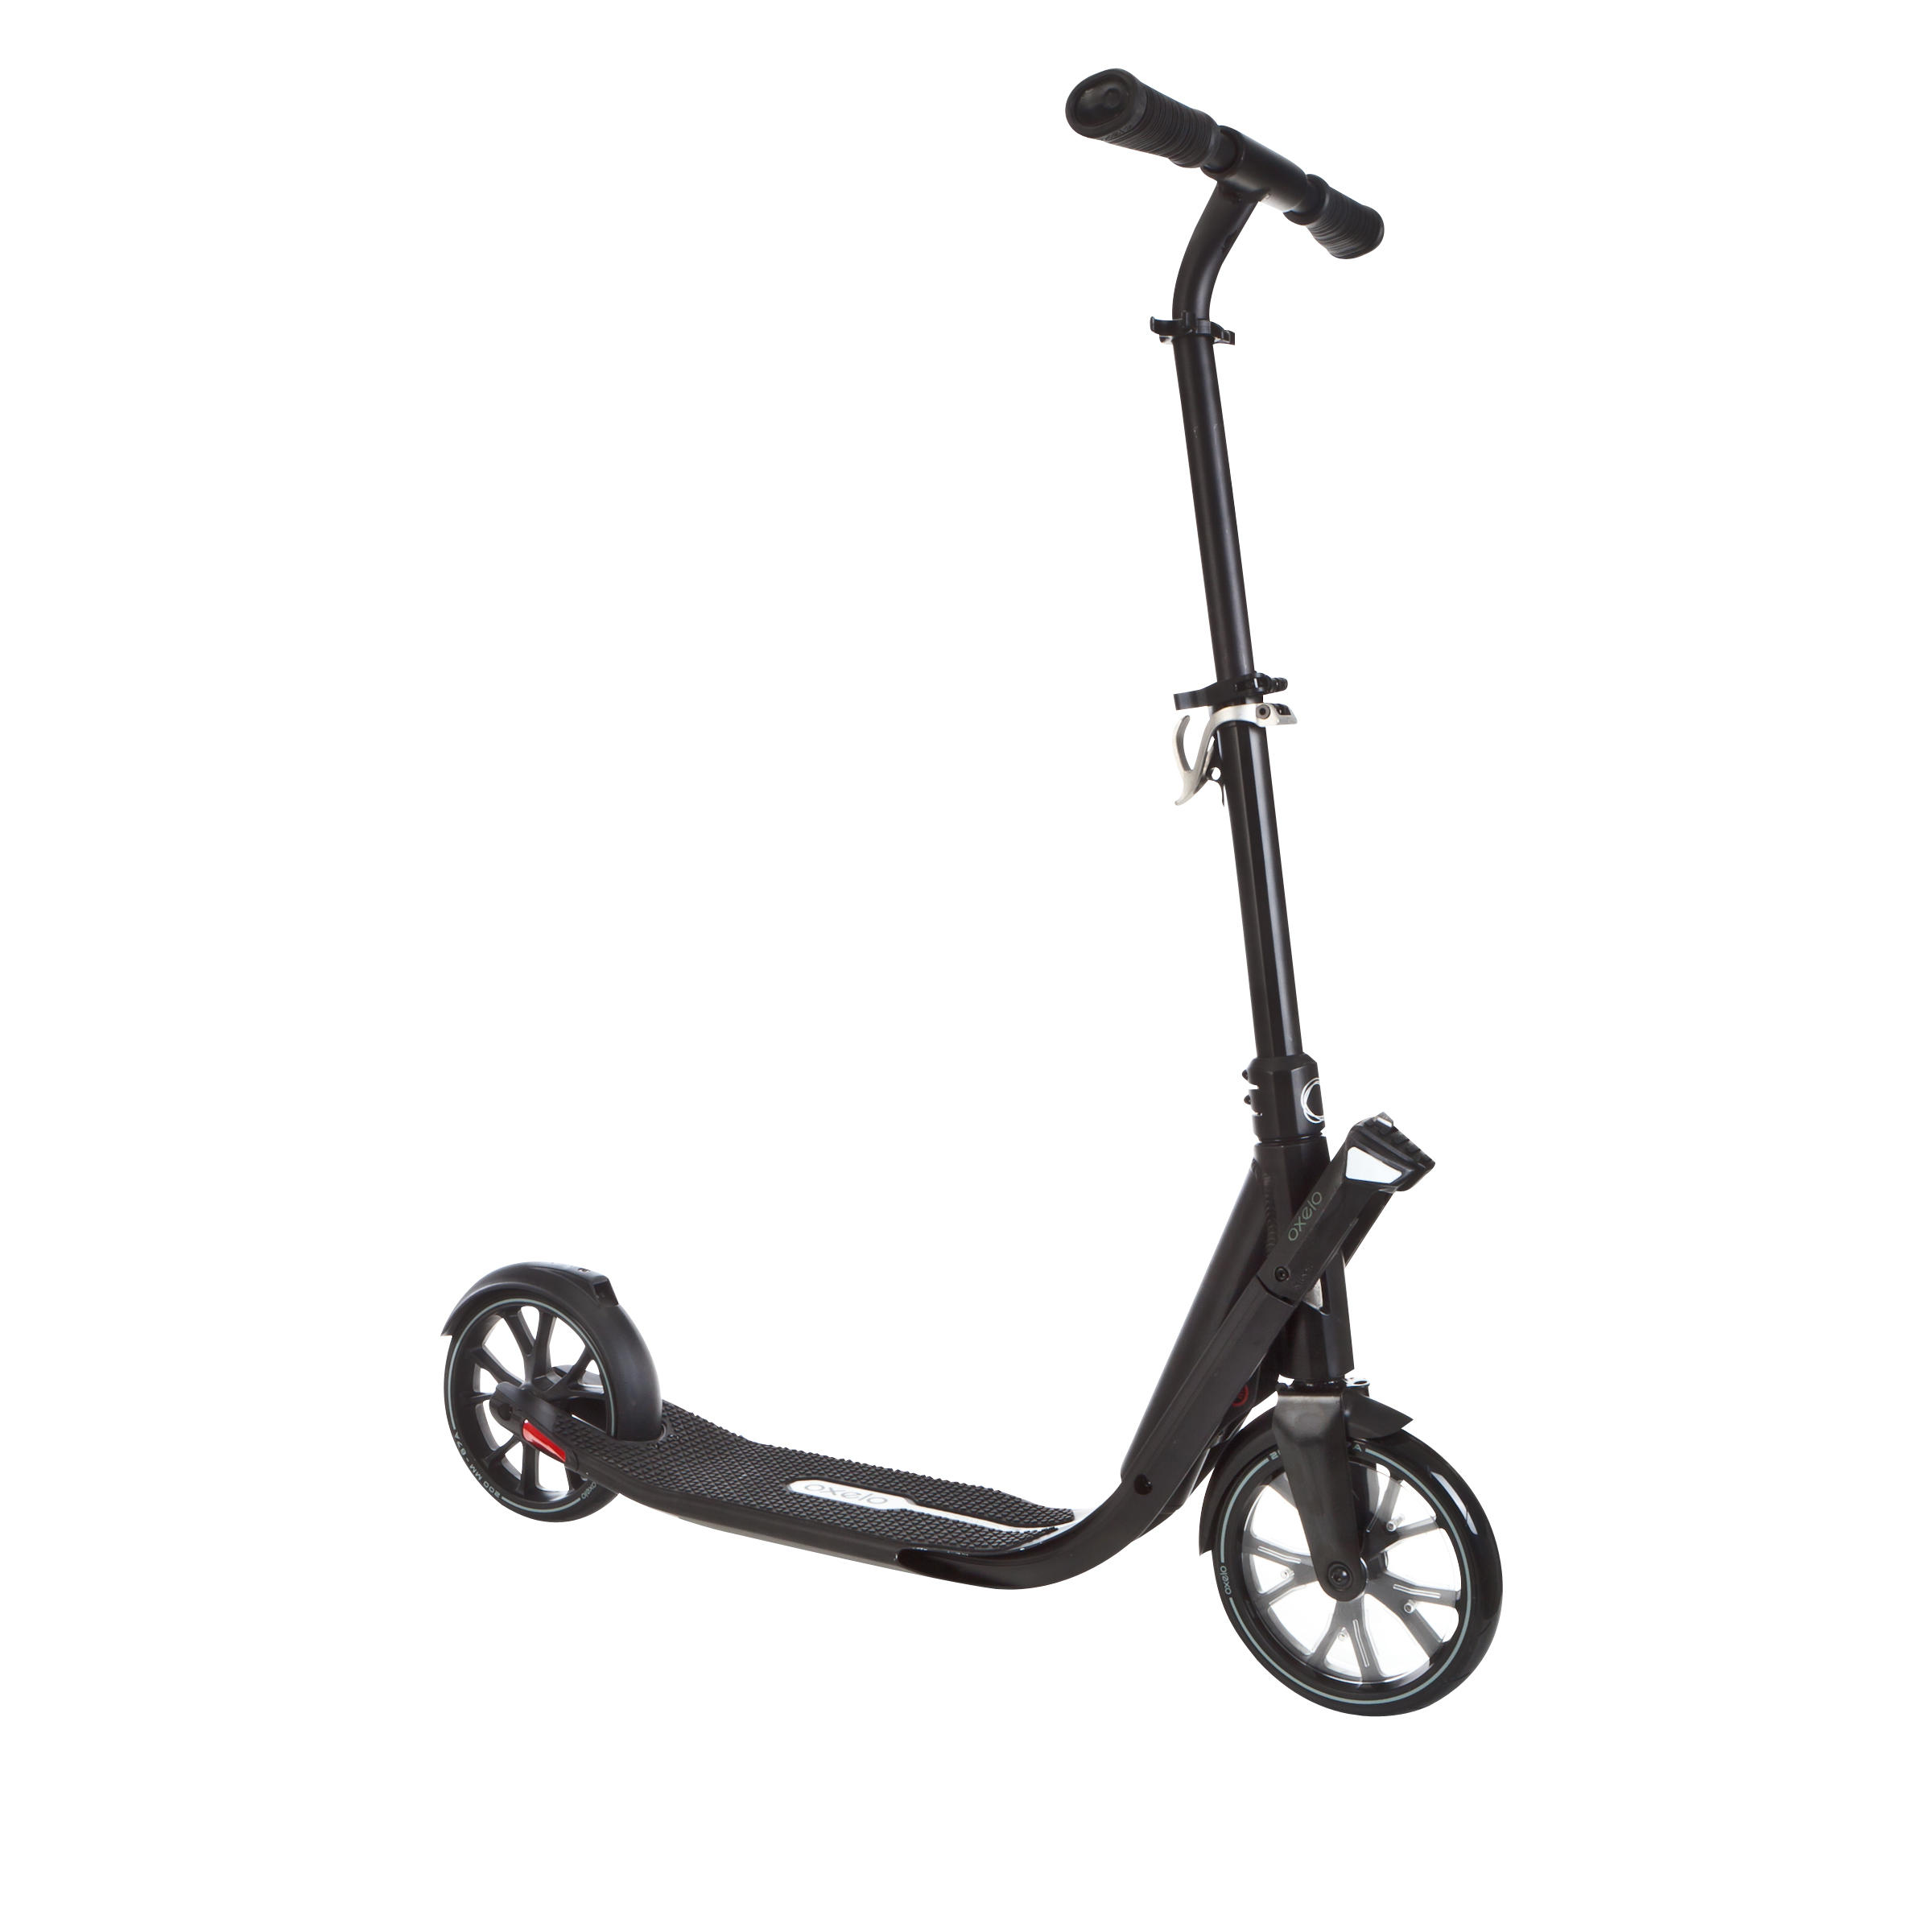 OXELO Town 7 EF 2015 Adult Scooter - Black